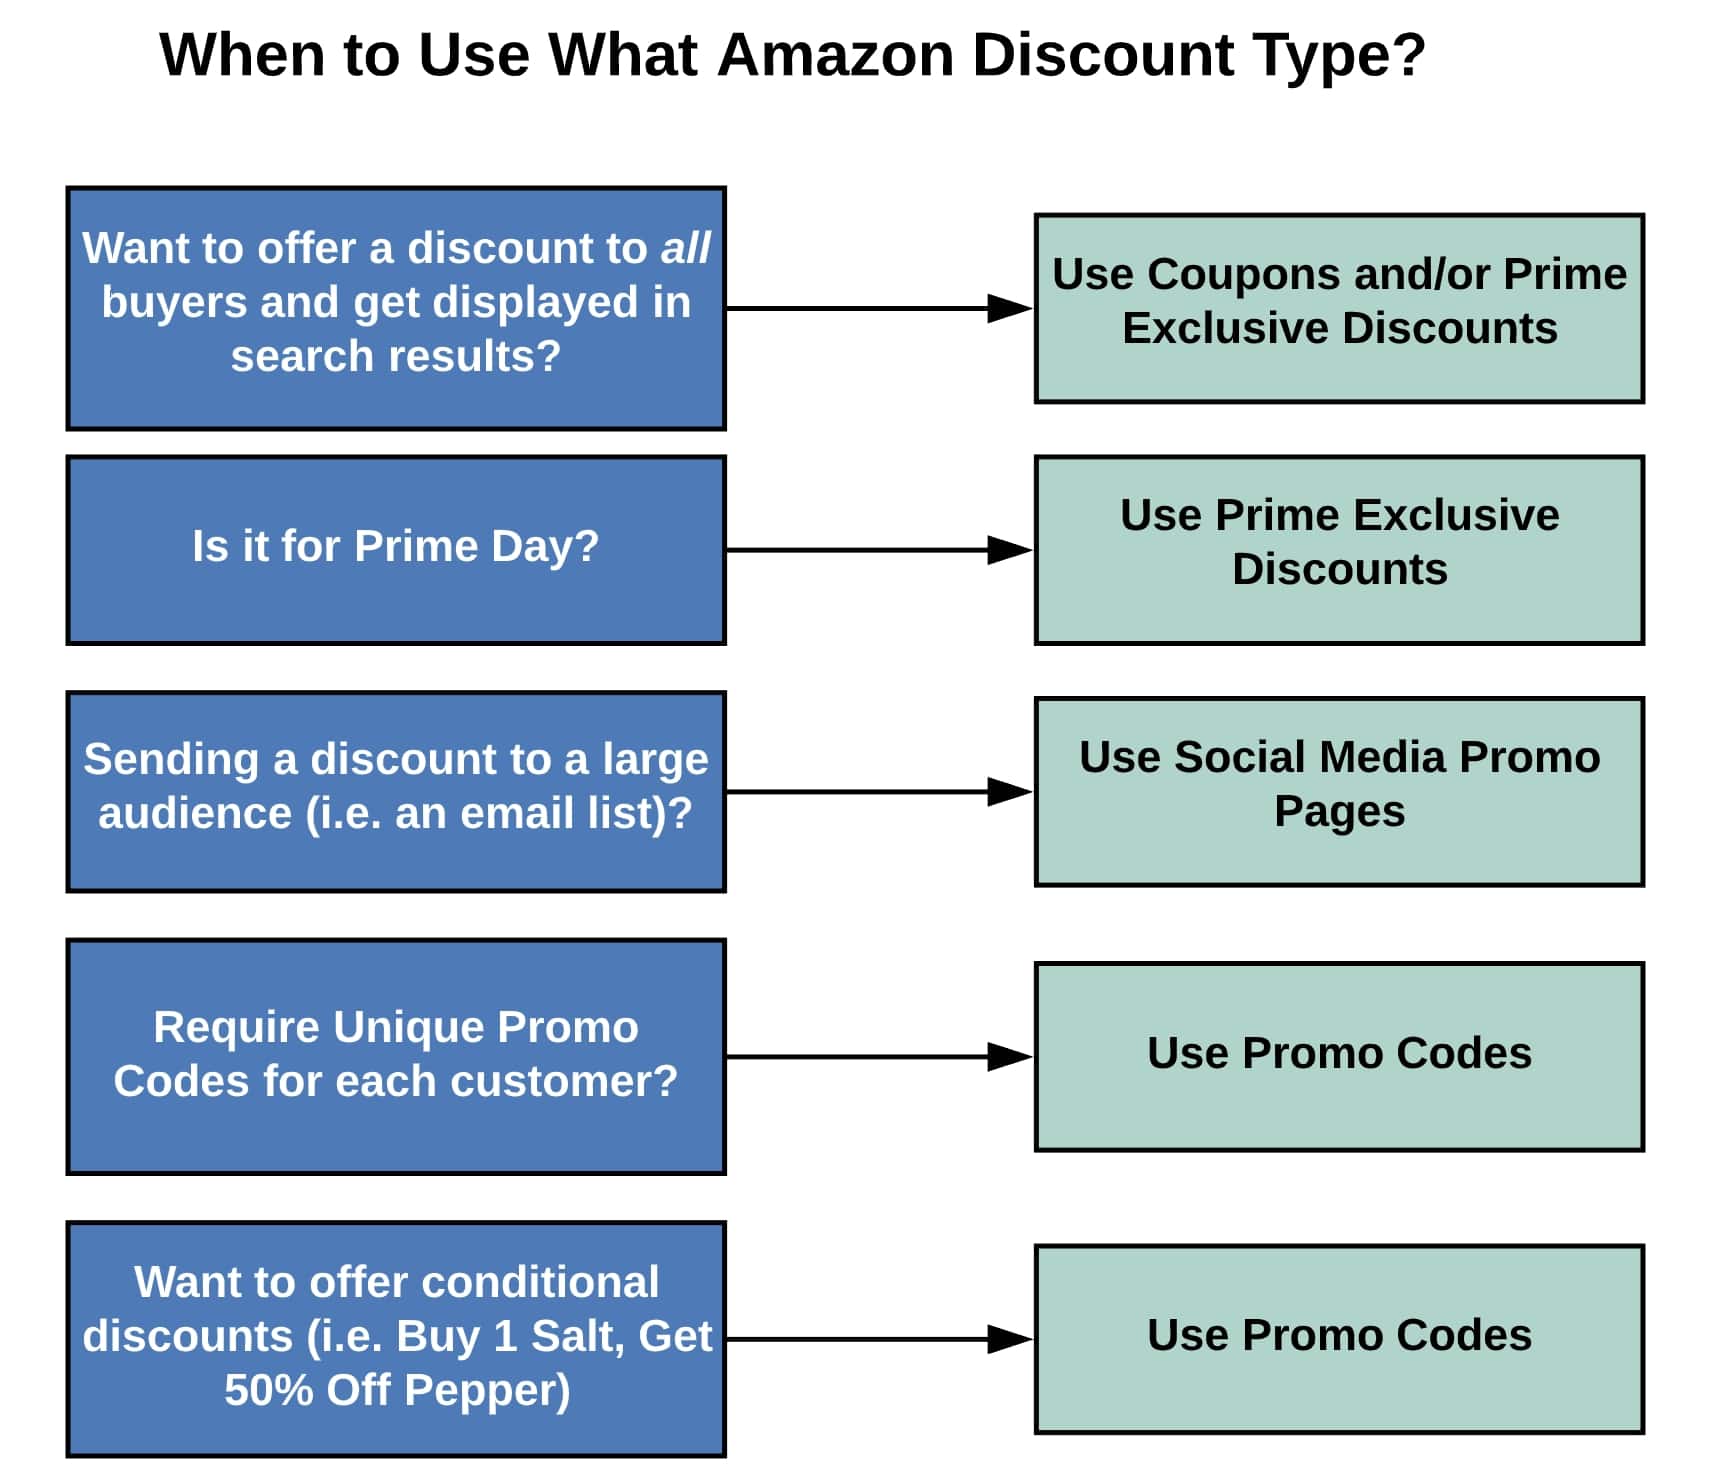 Prime Exclusive Discounts: How to Setup?